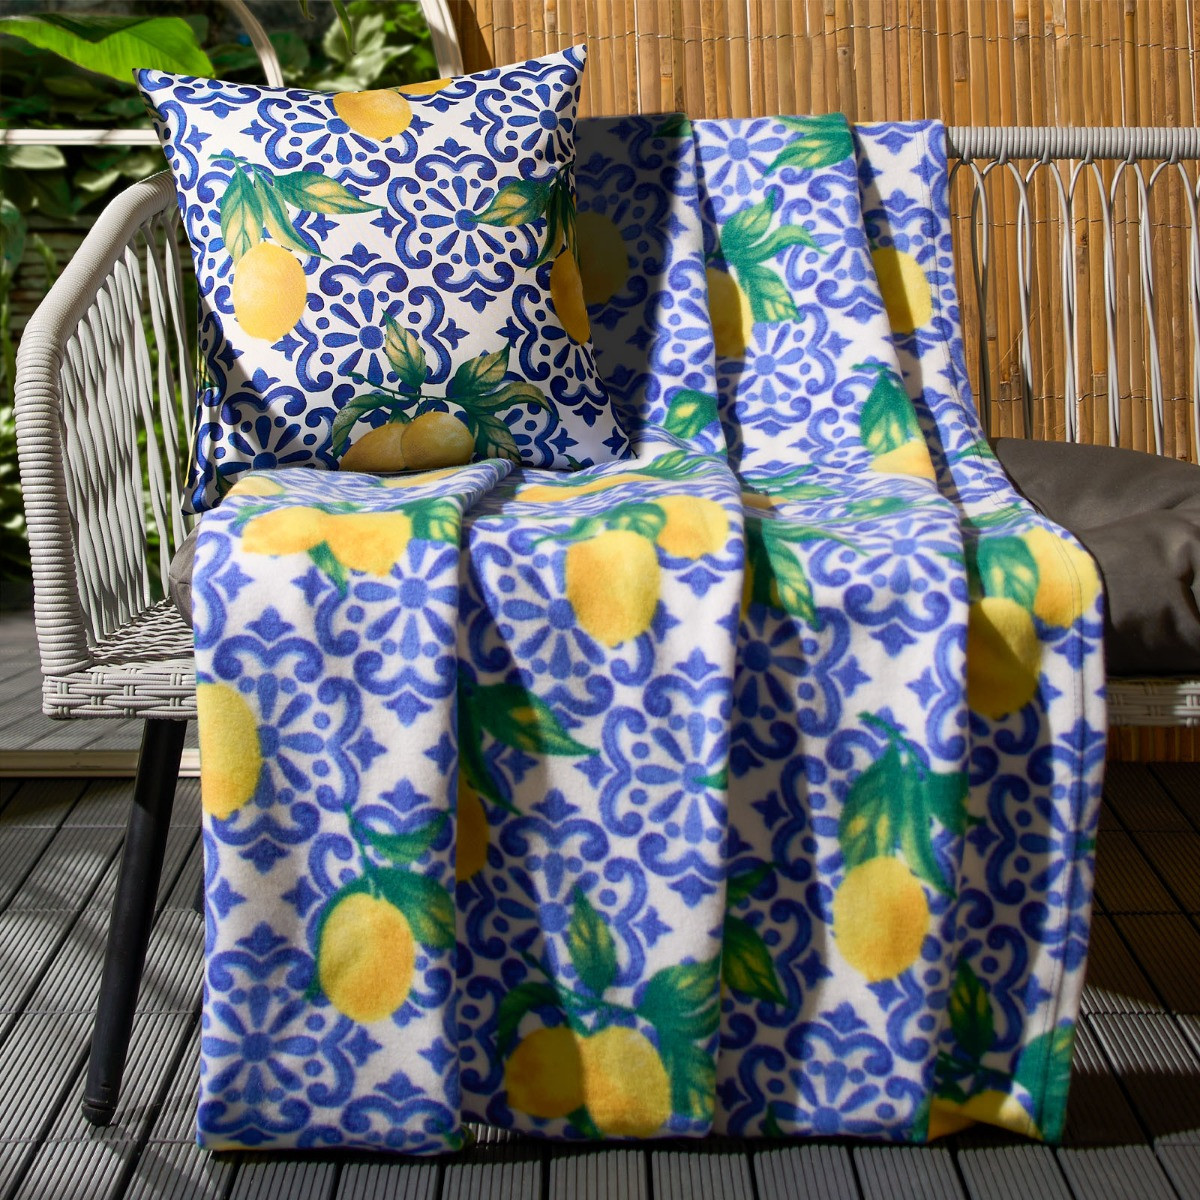 OHS Lemon Water Resistant Cushion Covers - Blue/White>